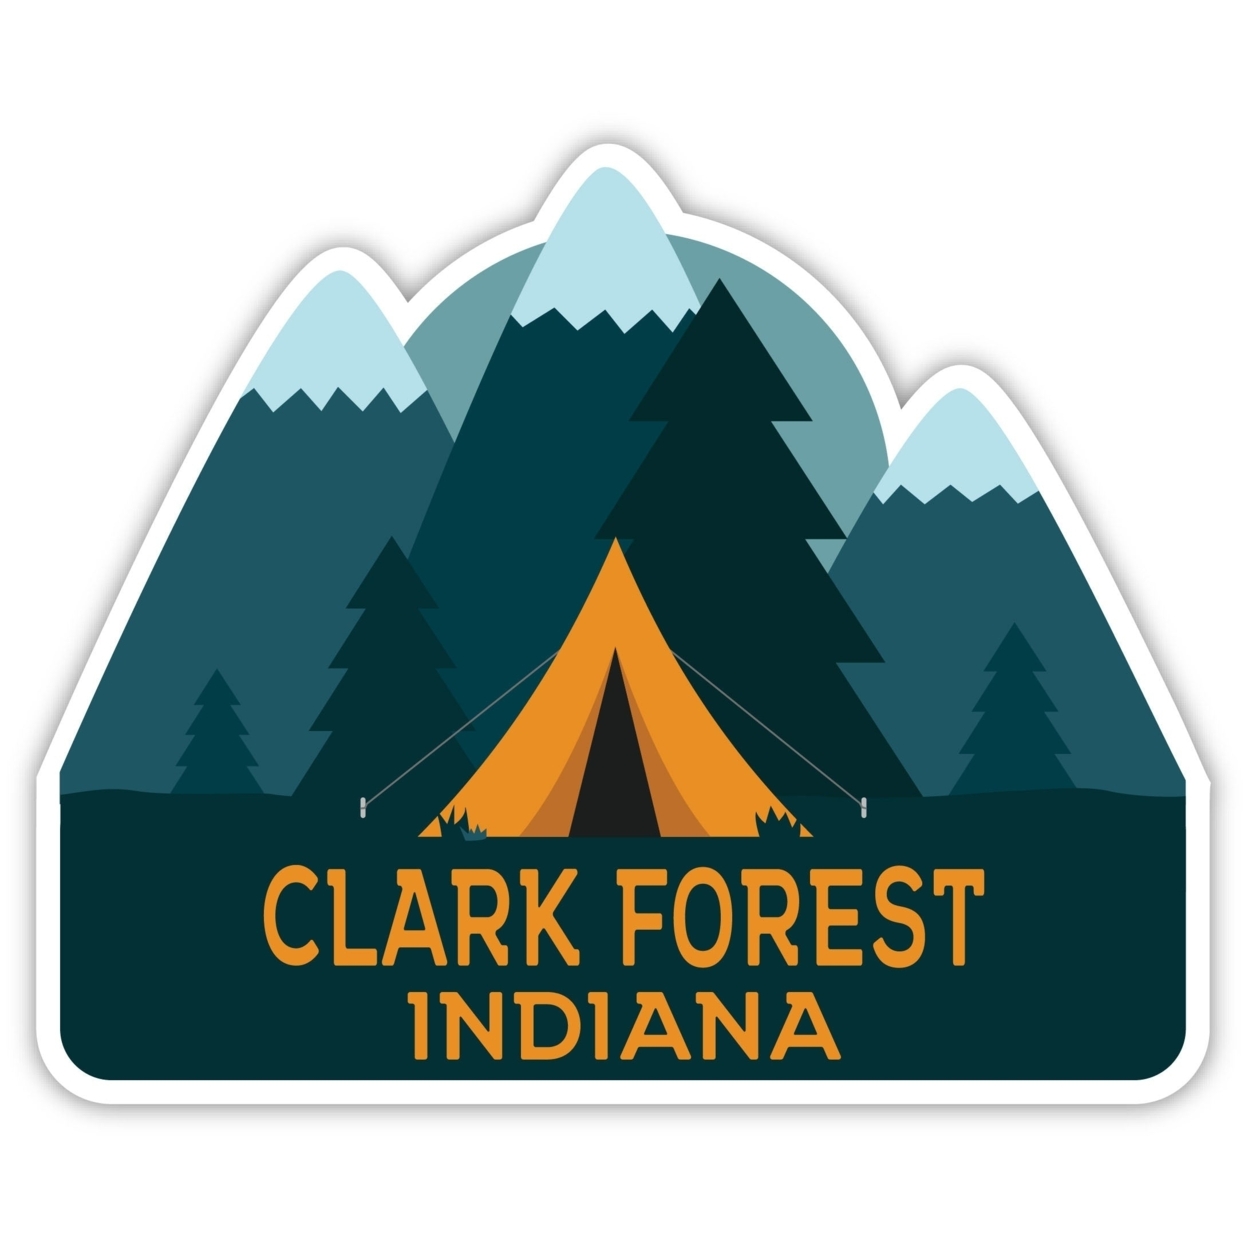 Clark Forest Indiana Souvenir Decorative Stickers (Choose Theme And Size) - Single Unit, 10-Inch, Tent